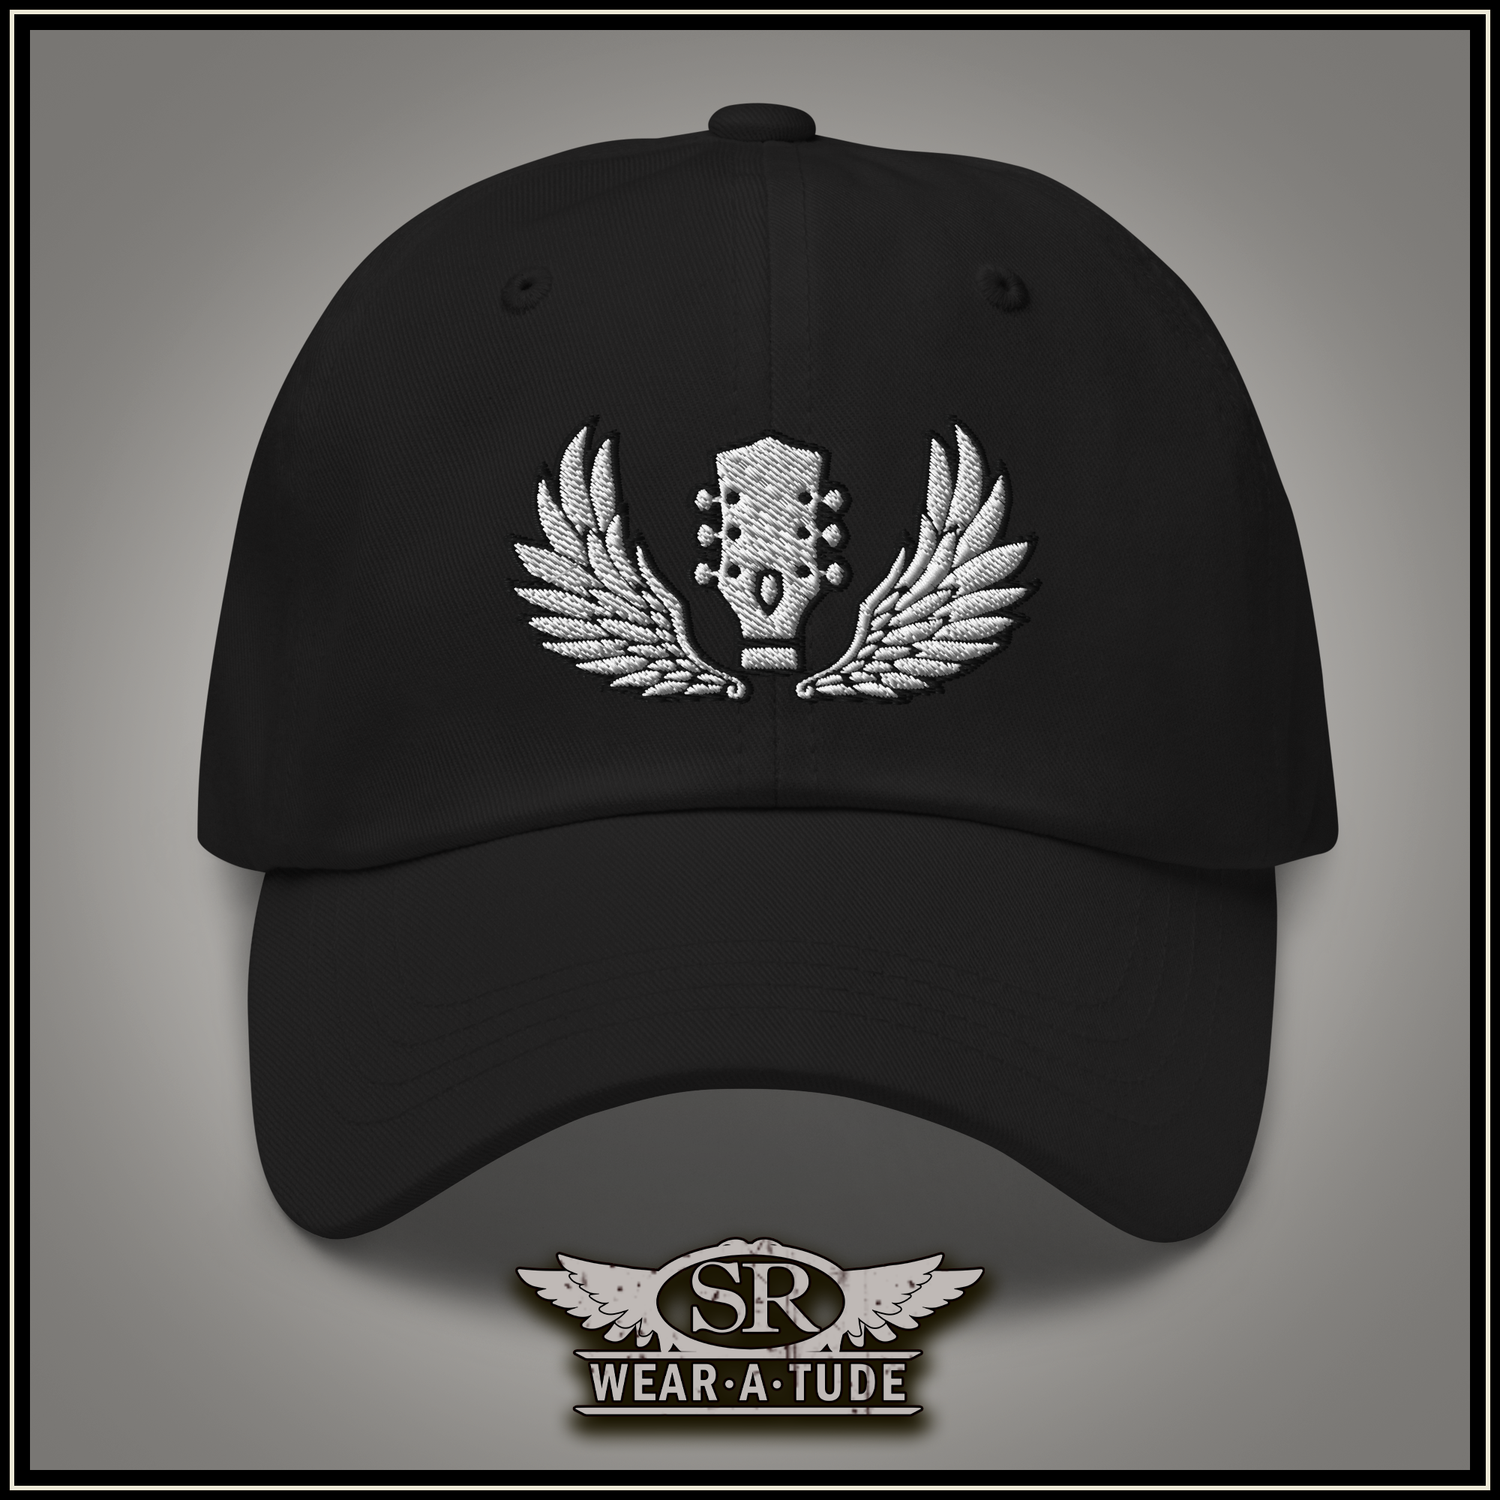 Classic-Rock-style-baseball-hat-embroidered-guitar-headstock-with-wings-SR WearAtude-by-SibBling Rivalry